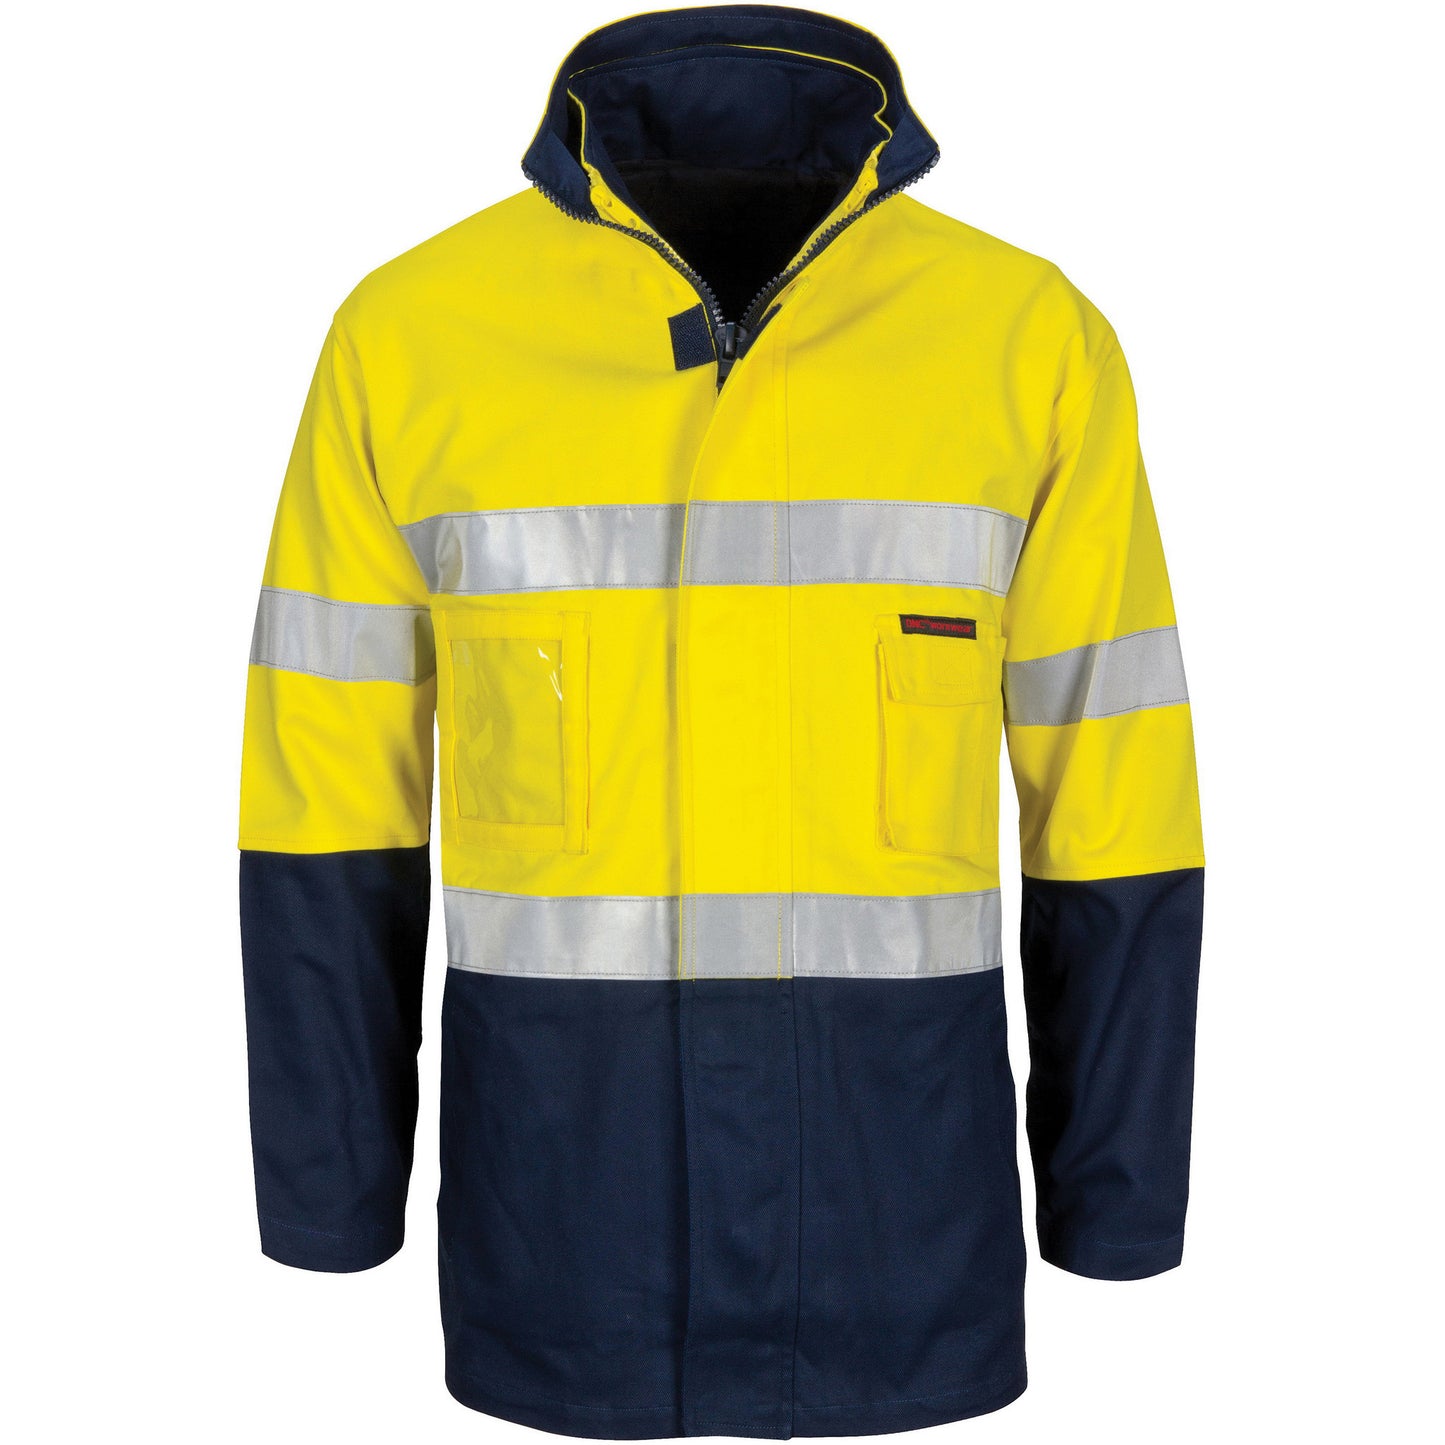 DNC HiVis "4 IN 1" Cotton Drill Jacket with Generic R/Tape (3764)